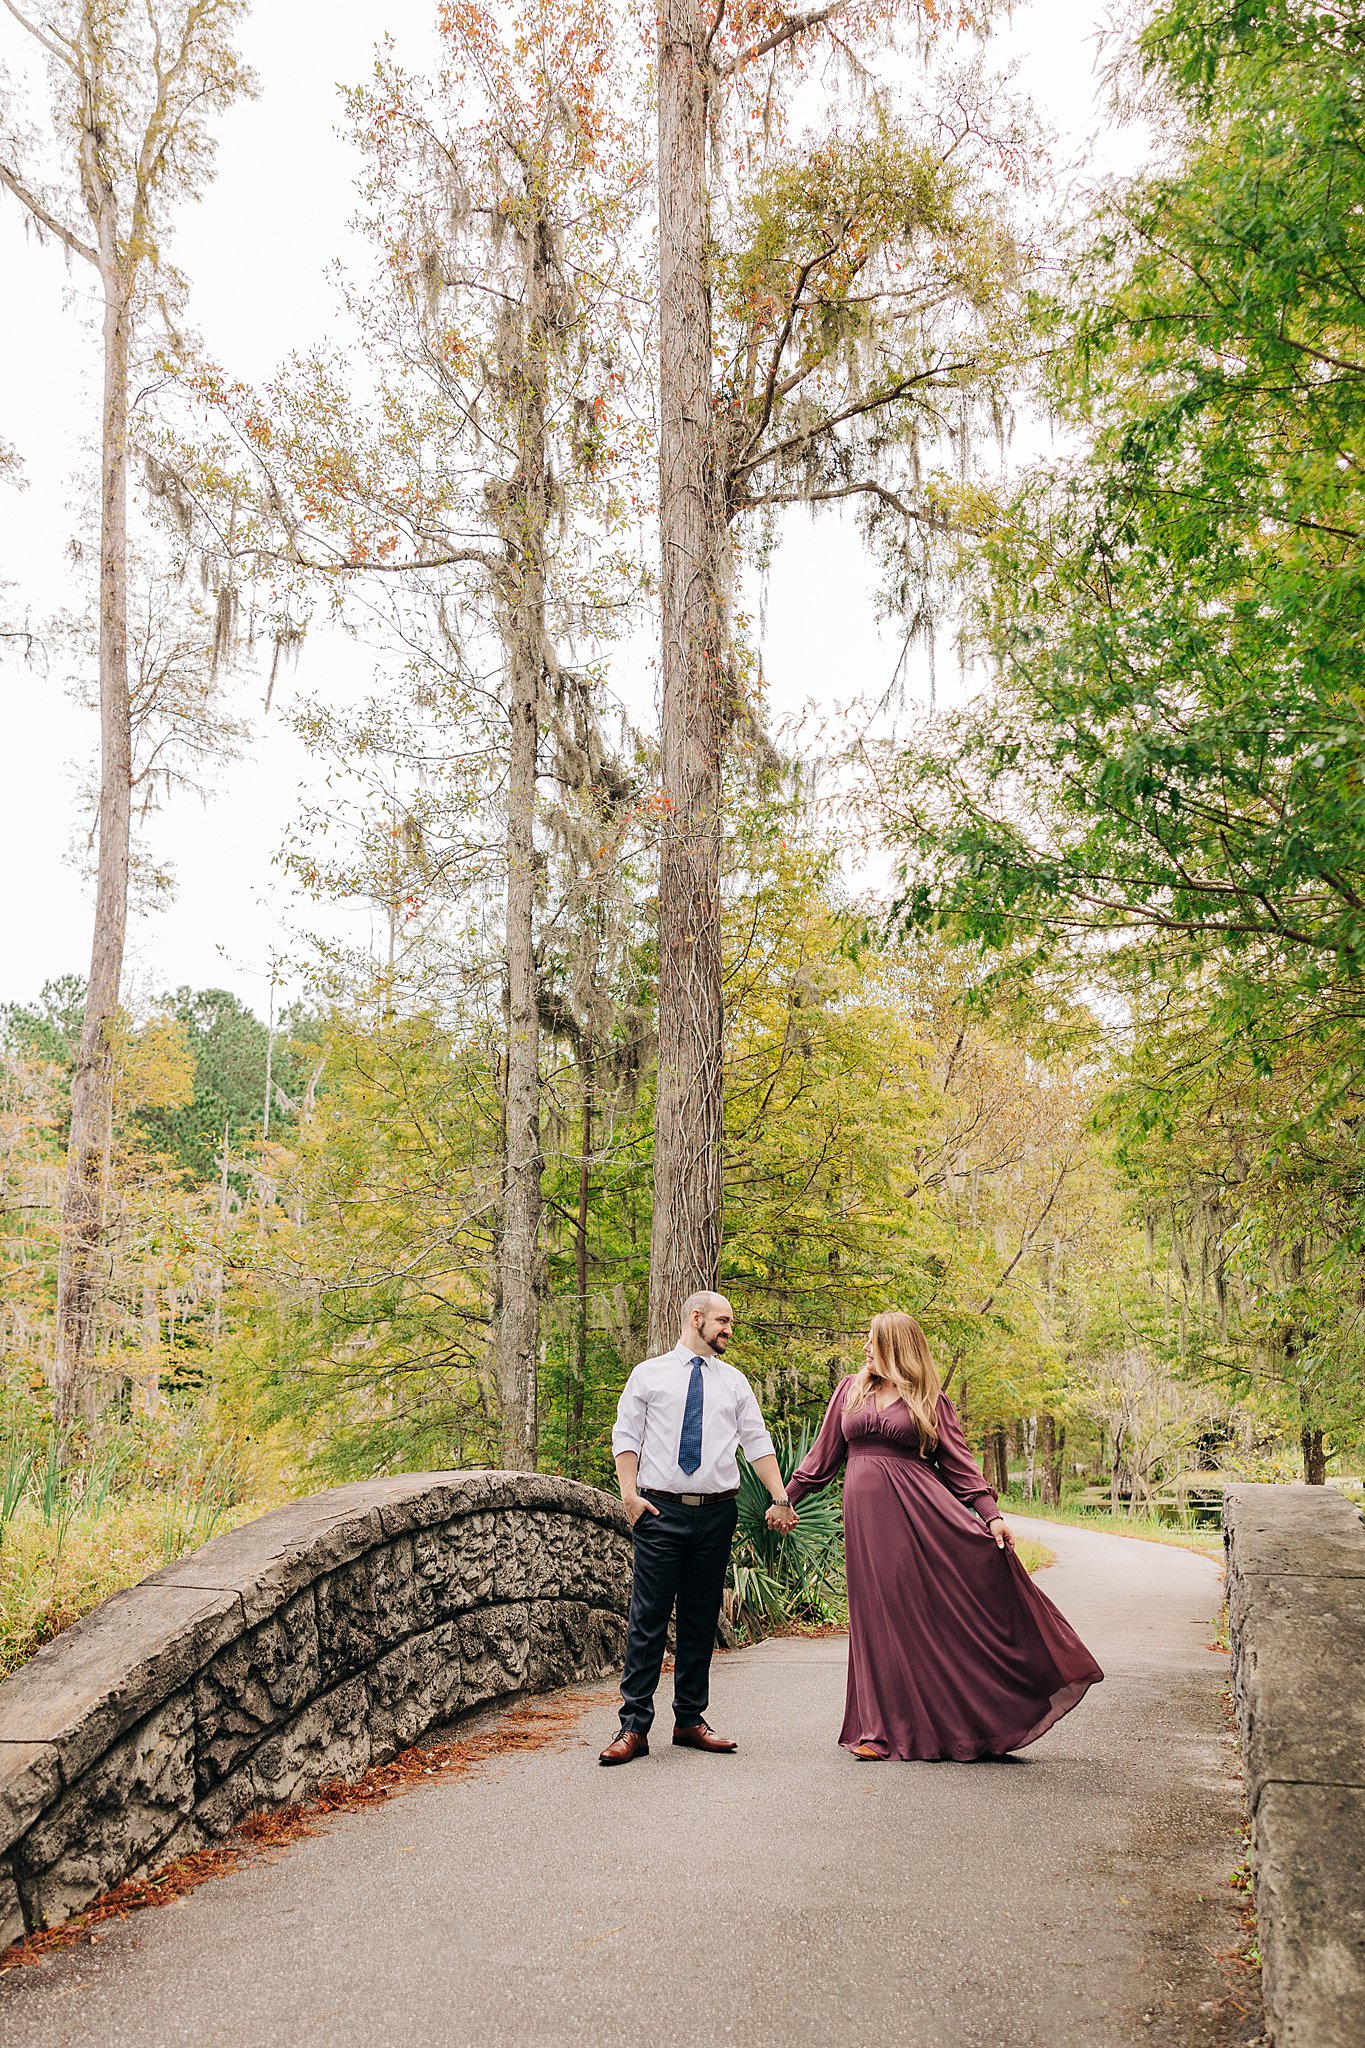 A newly engaged couple hold hands while walking across an old stone bridge walkway during their cypress gardens wedding engagement